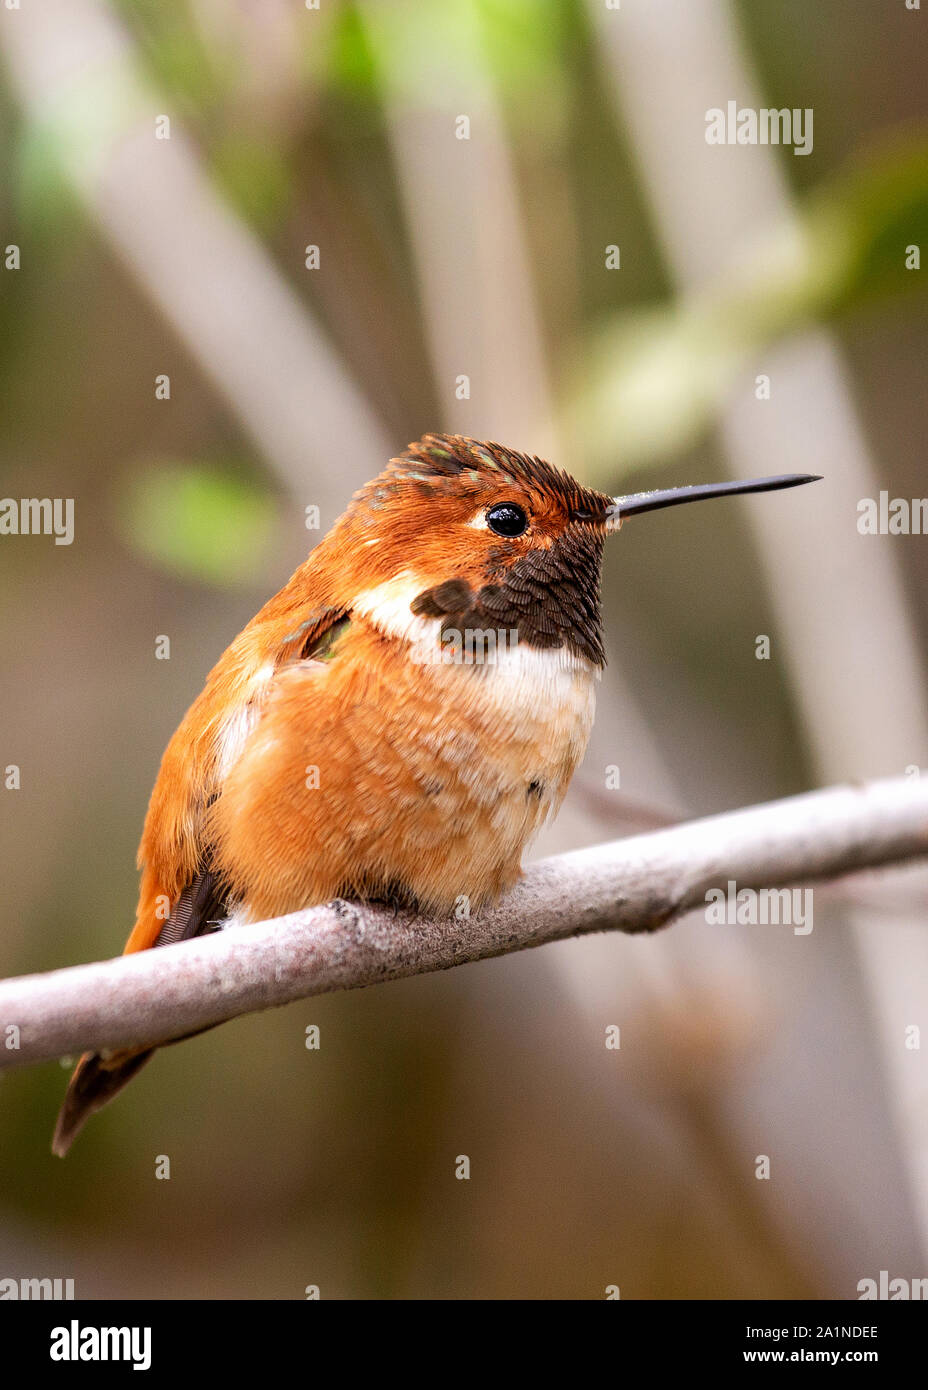 An adult male Allen’s hummingbird perched on a branch wakes from sleep with fluffed feathers, background is blurred Stock Photo